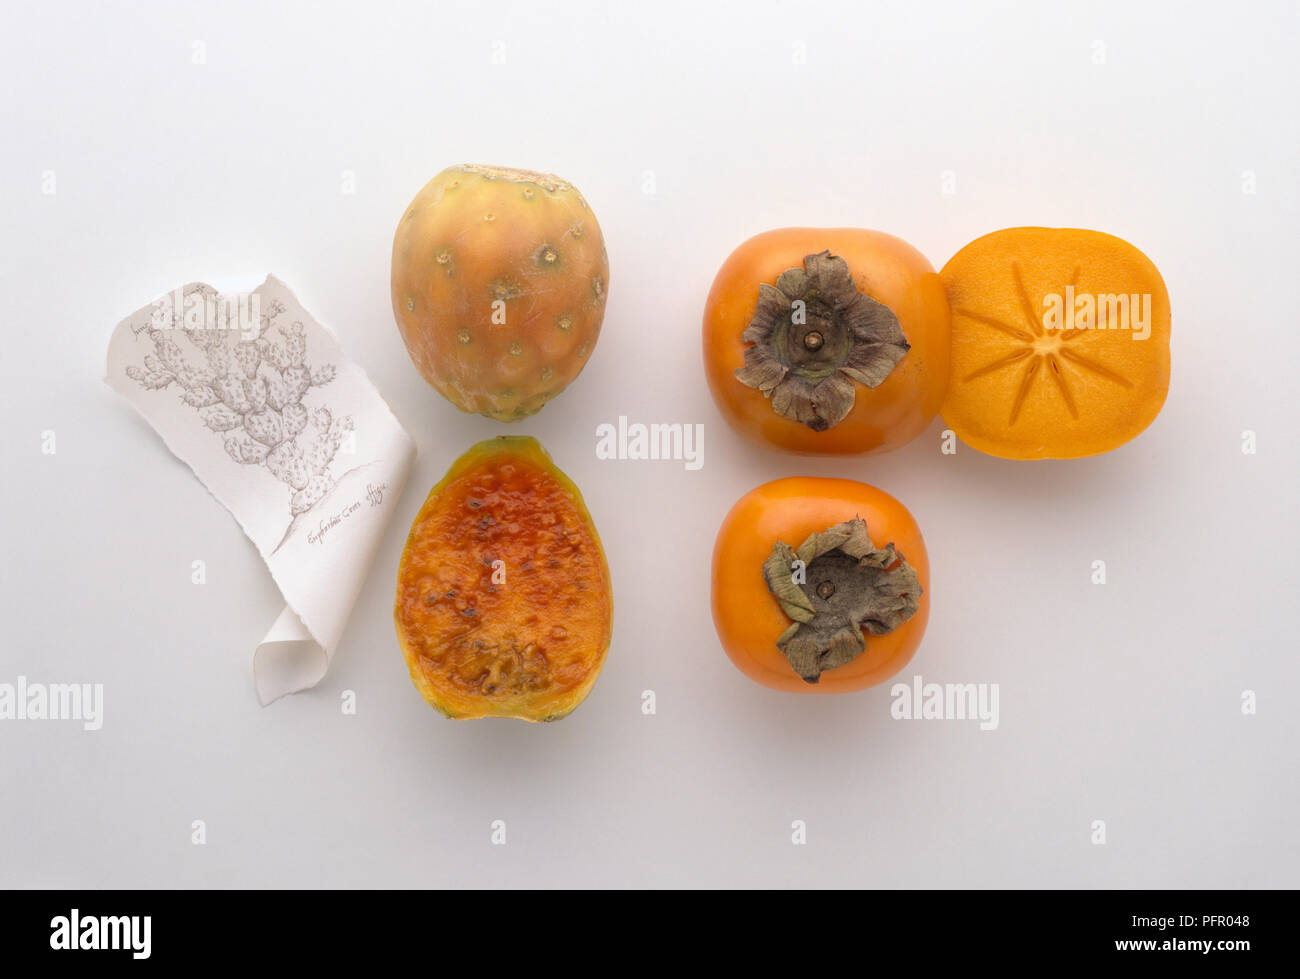 Whole and sliced Fuyu persimmon and prickly pear fruits Stock Photo